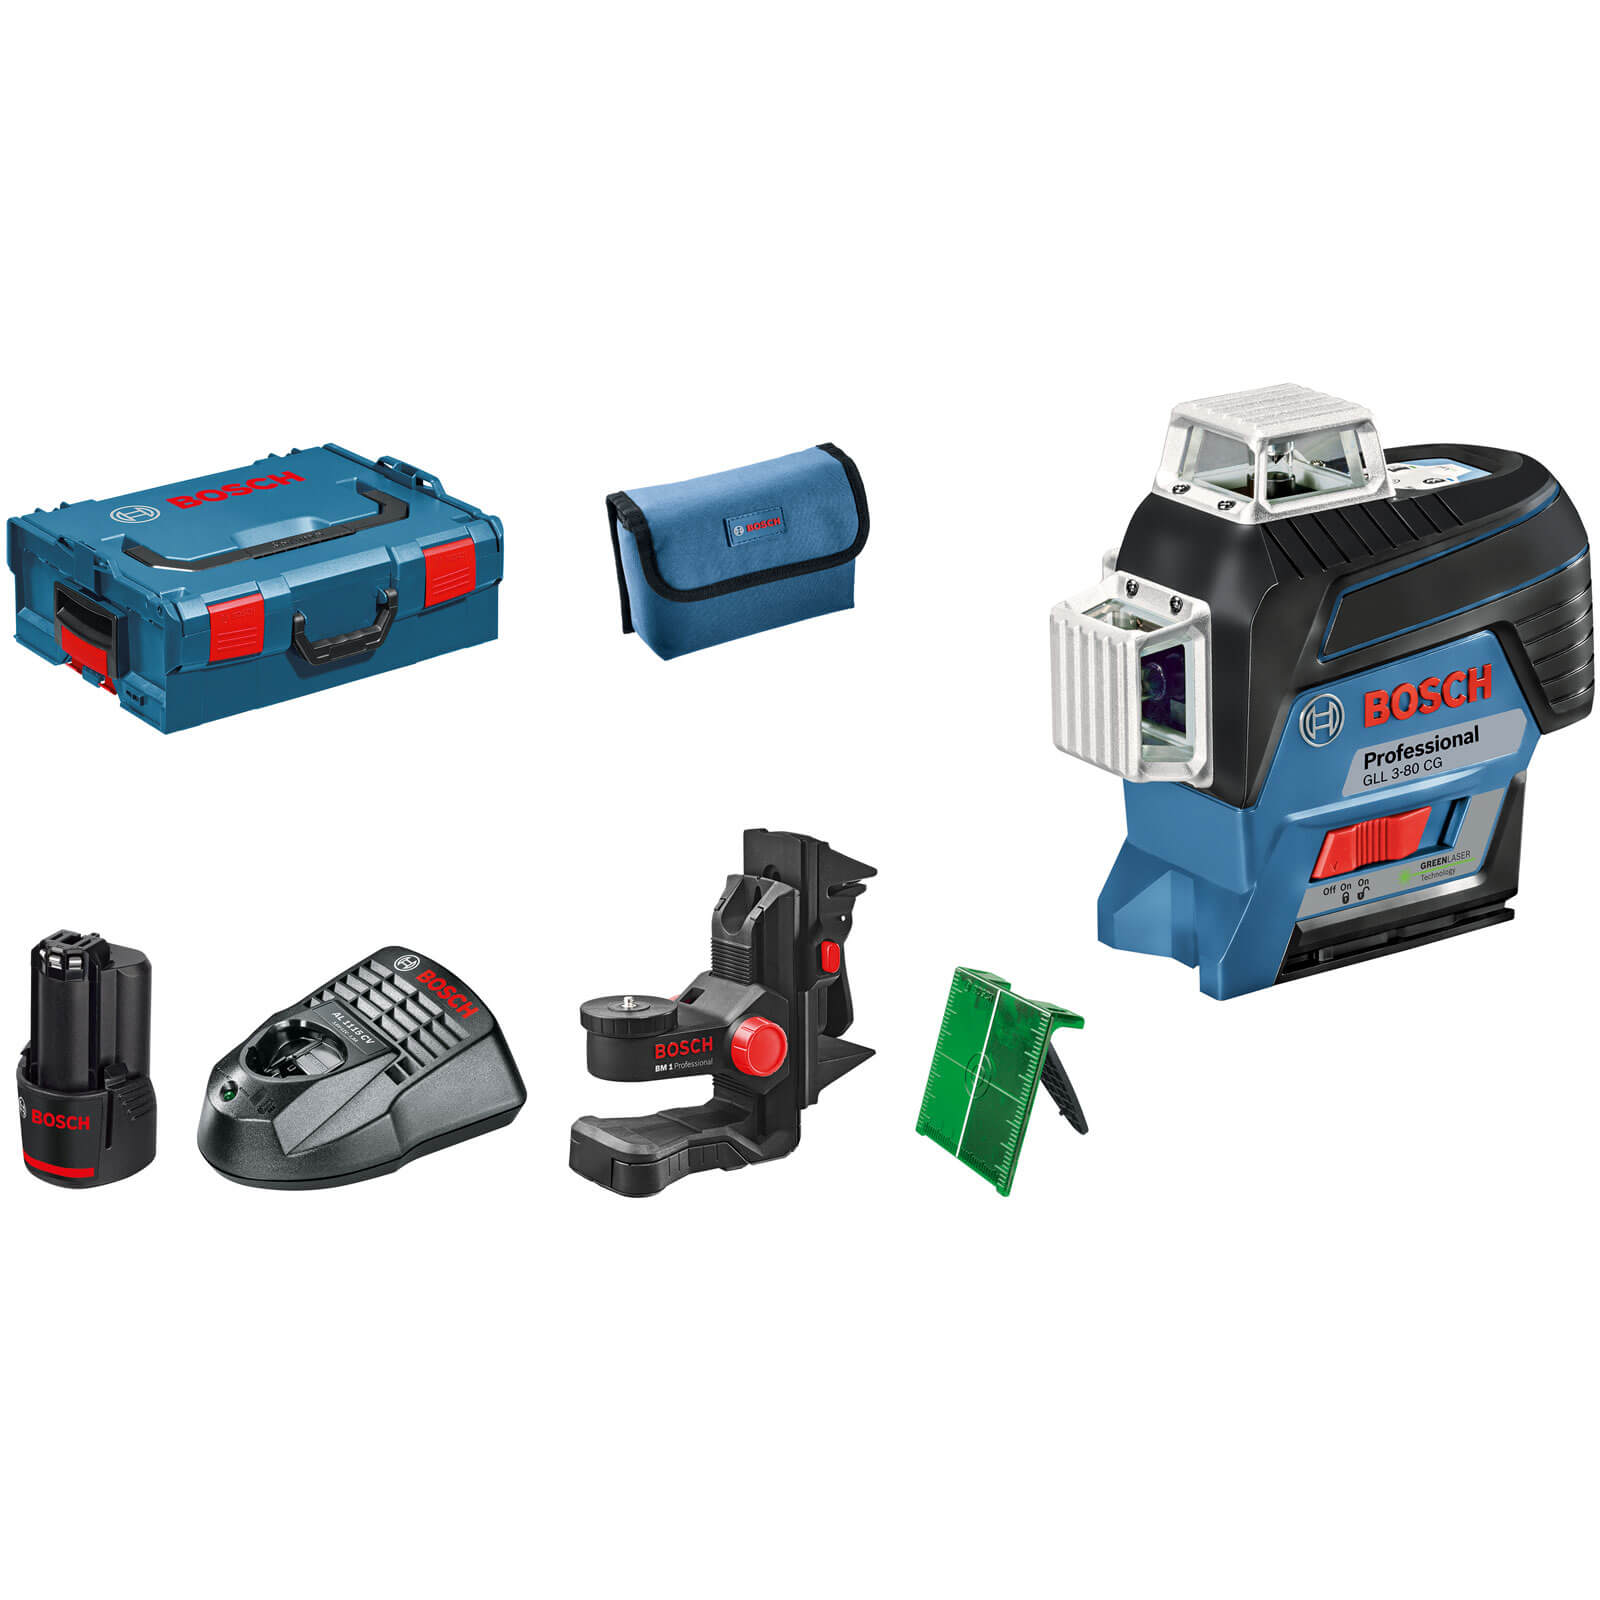 Bosch GLL 3-80 CG 12v Cordless Connected Green Line Laser Level 1 x 2ah Li-ion Charger Case